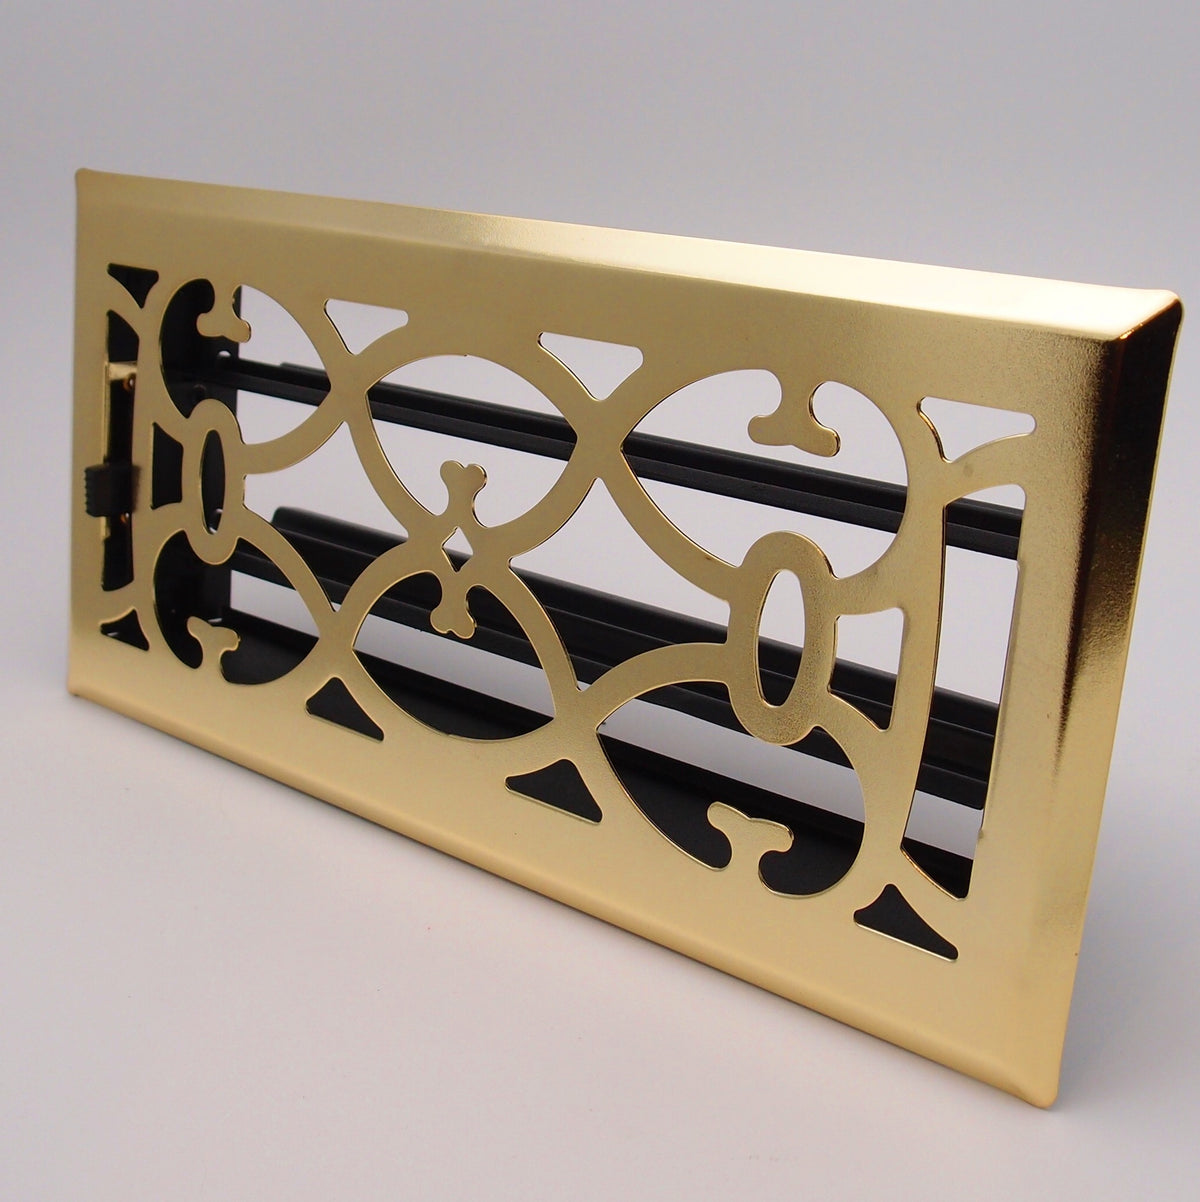 2&quot; X 12&quot; Brass Victorian Floor Register Grille - Modern Contempo Decorative Grate - HVAC Vent Duct Cover - Brass Plated